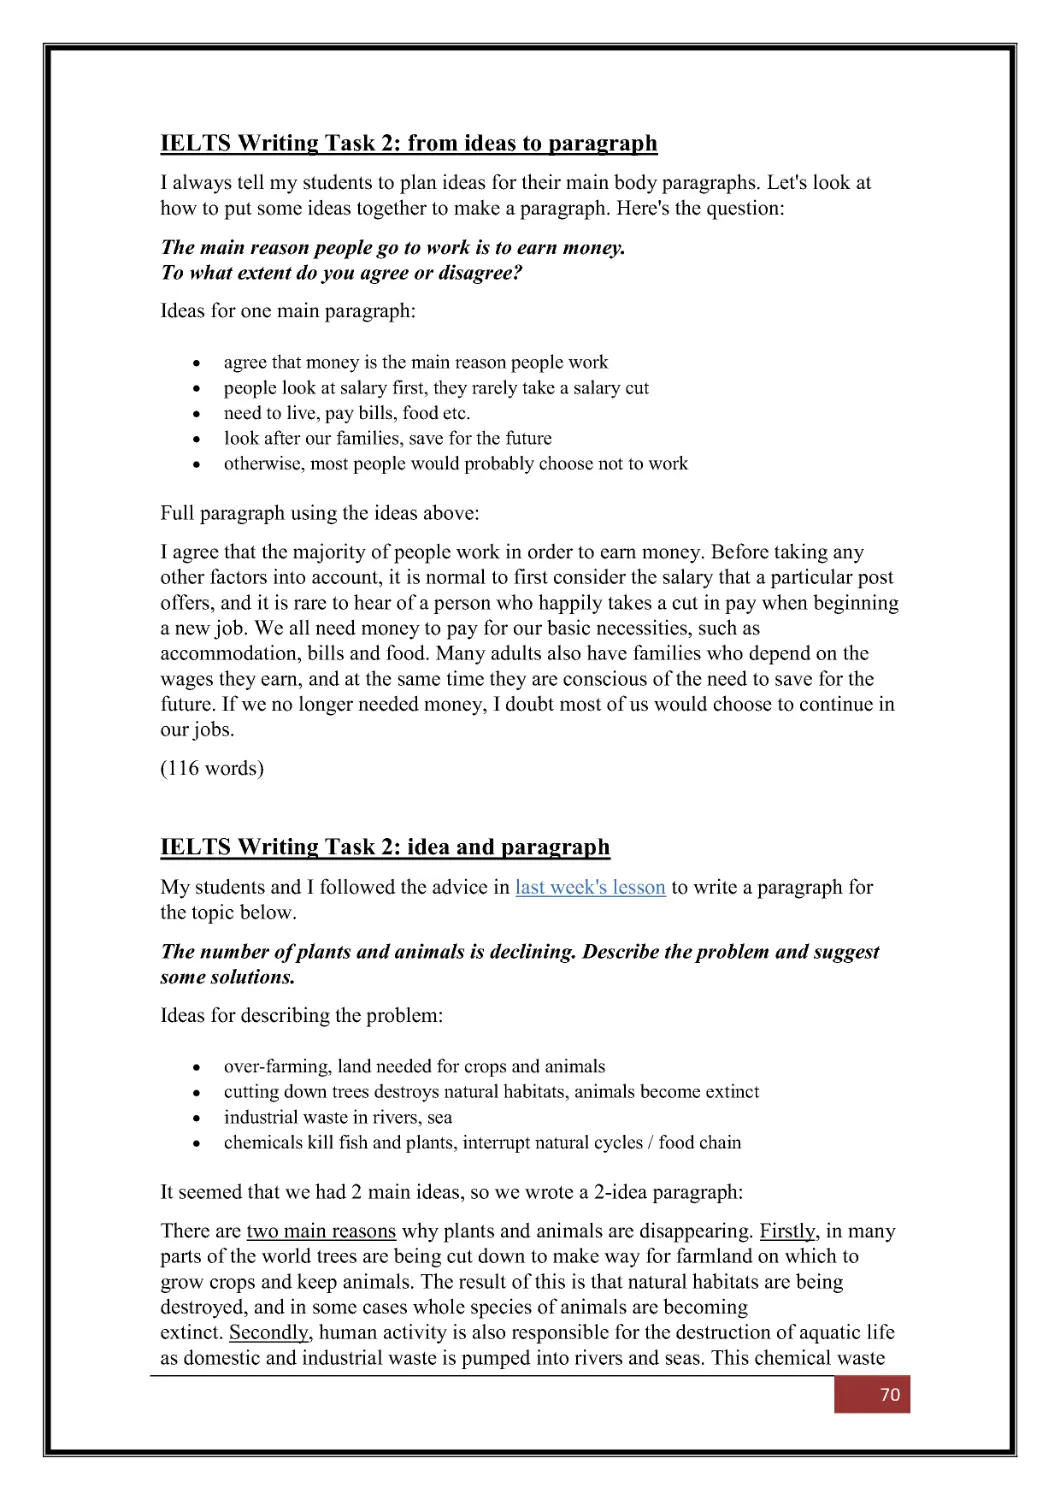 UIELTS Writing Task 2: from ideas to paragraphU
UIELTS Writing Task 2: idea and paragraphU